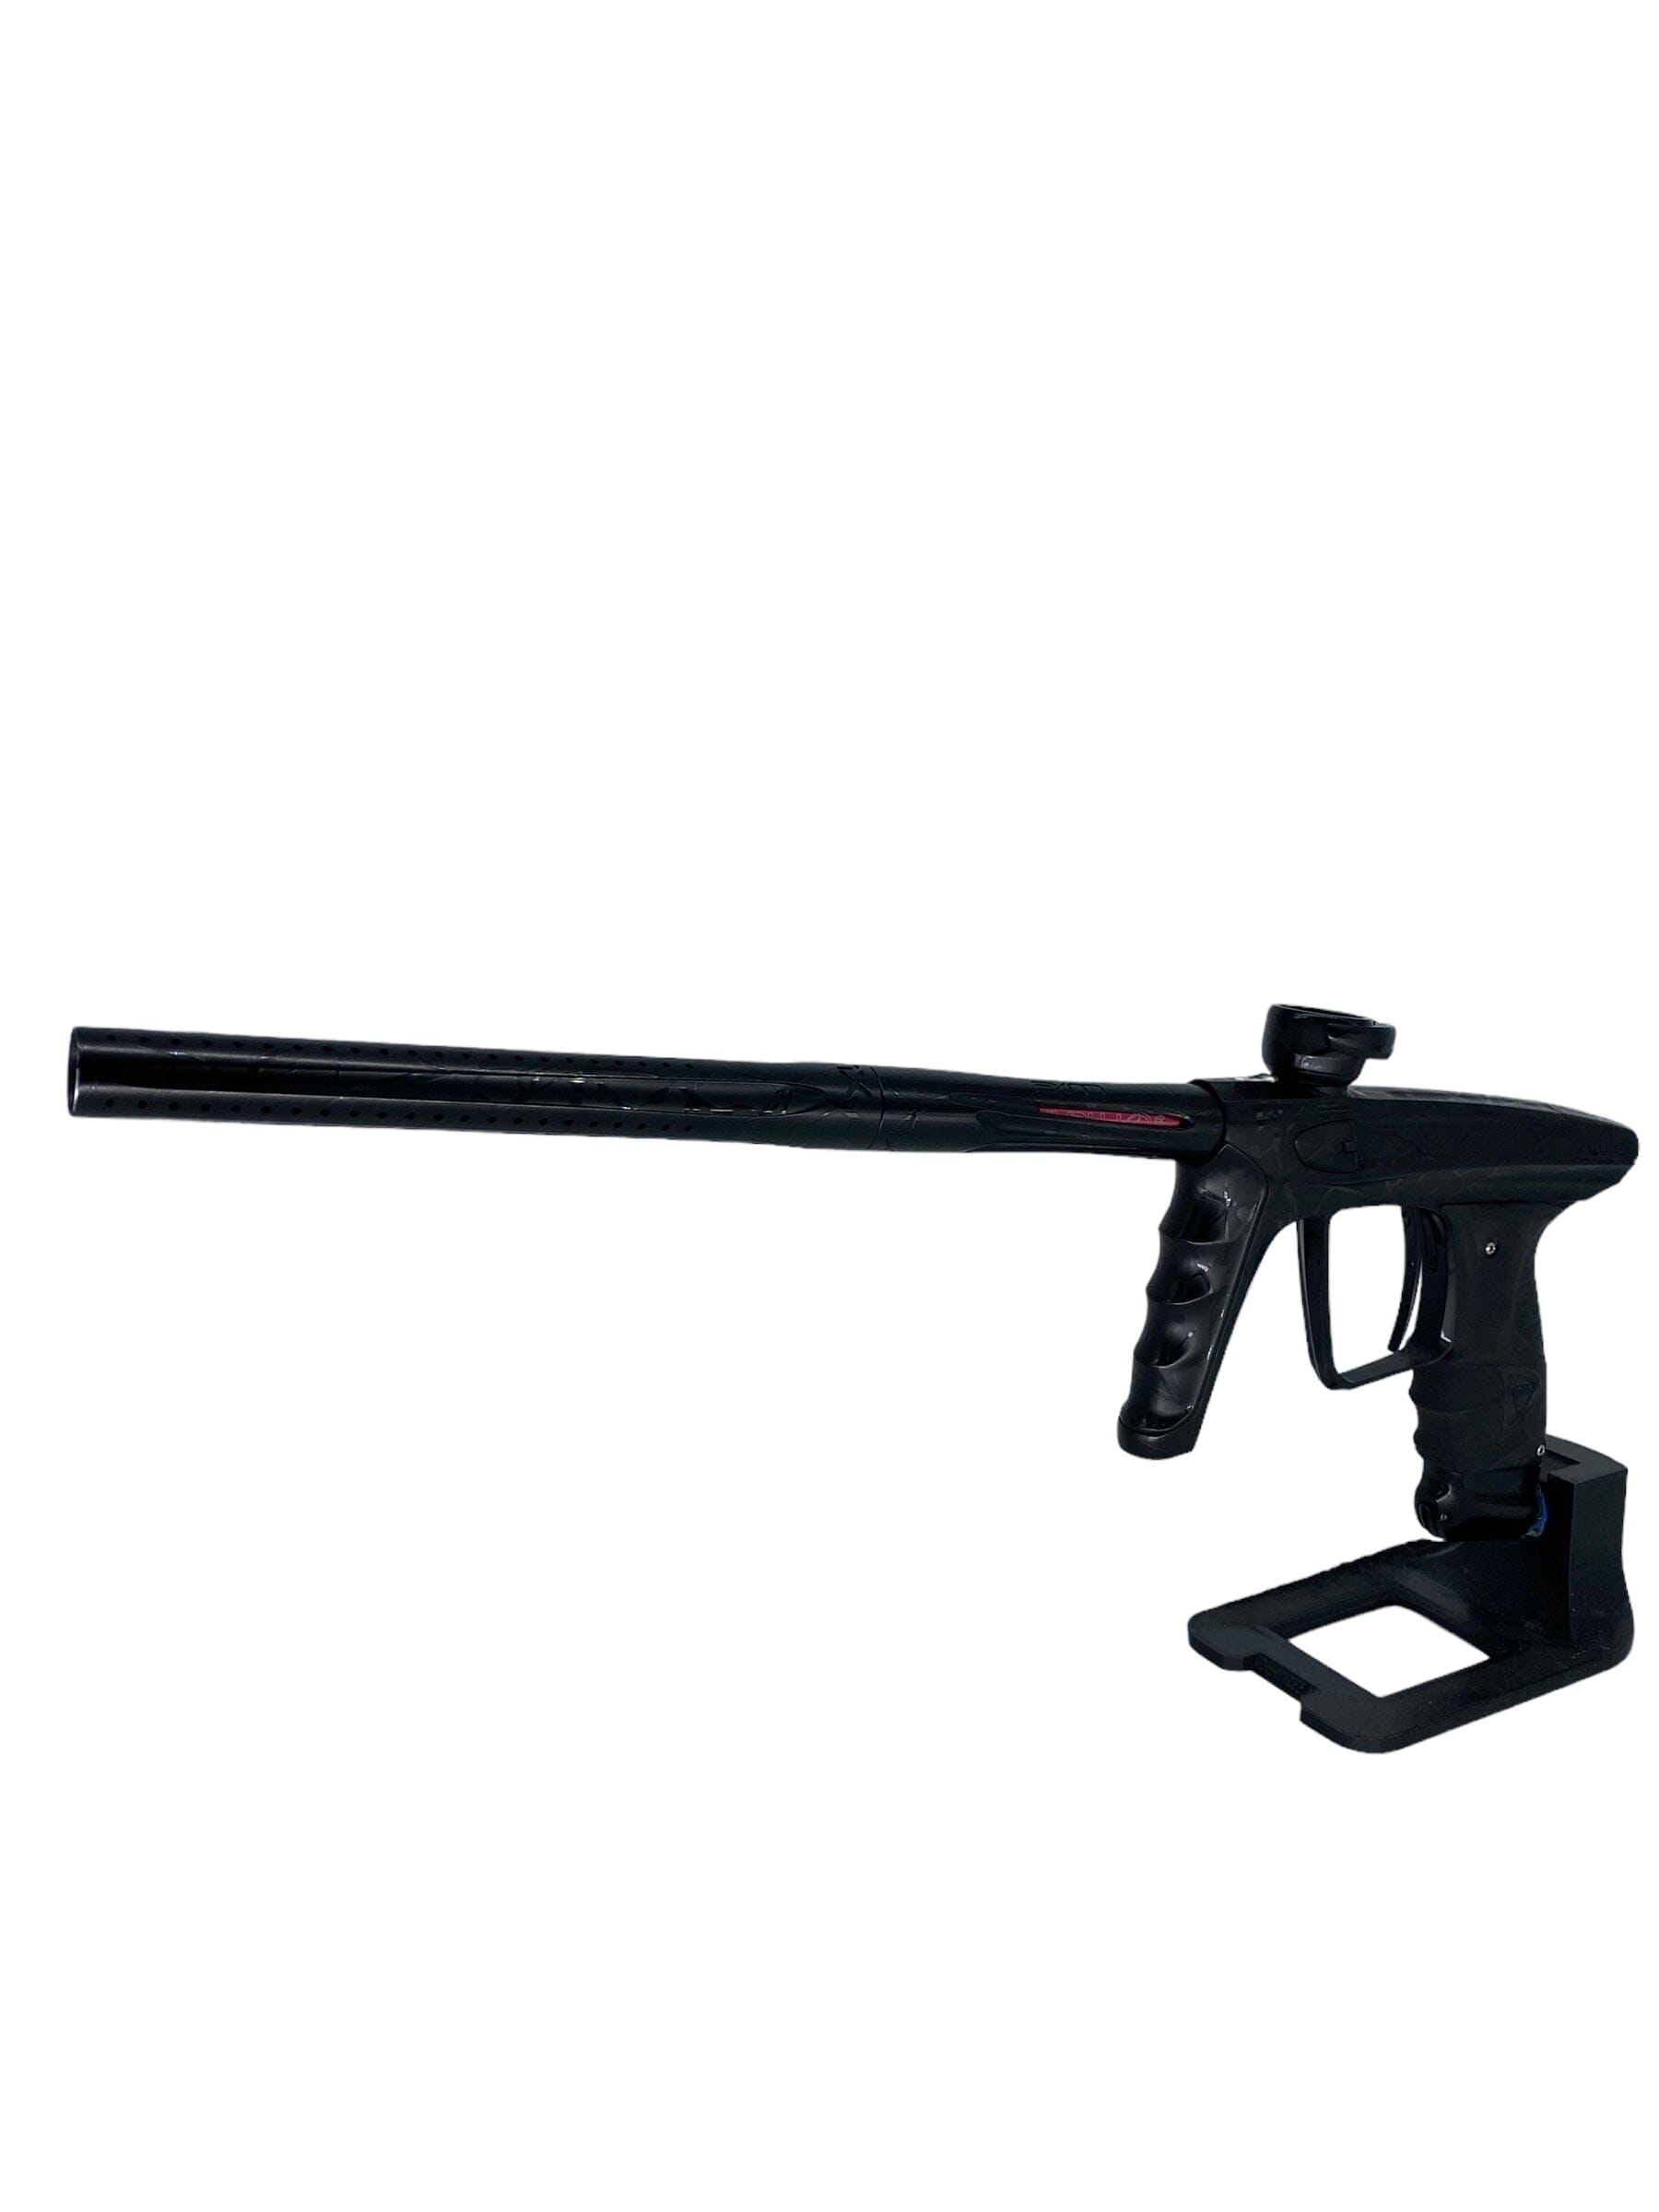 Used Dlx Luxe X Paintball Gun Paintball Gun from CPXBrosPaintball Buy/Sell/Trade Paintball Markers, New Paintball Guns, Paintball Hoppers, Paintball Masks, and Hormesis Headbands